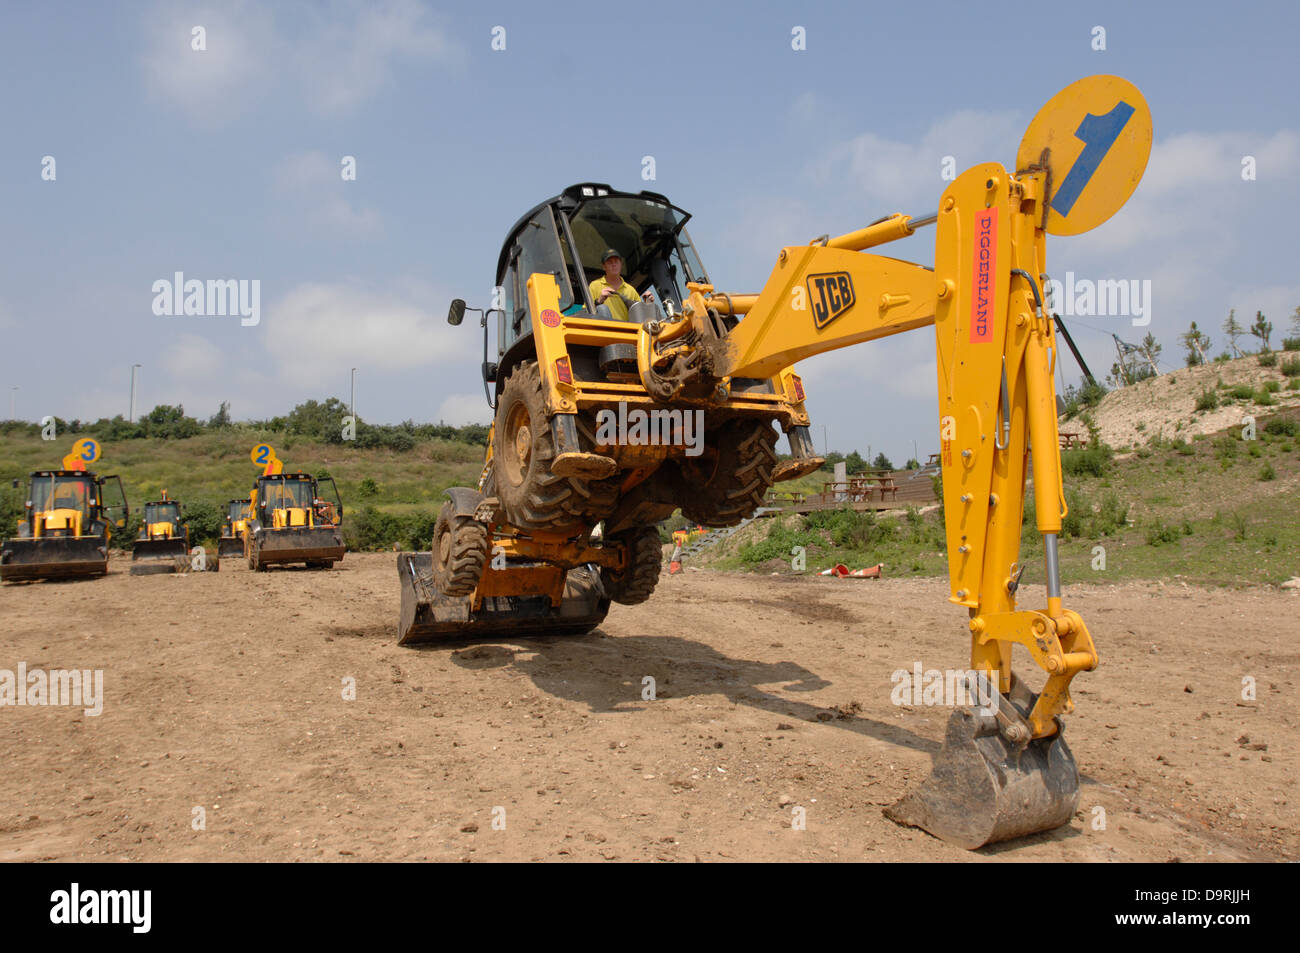 JCB racing e acrobazie in Diggerland Strood Kent Foto Stock